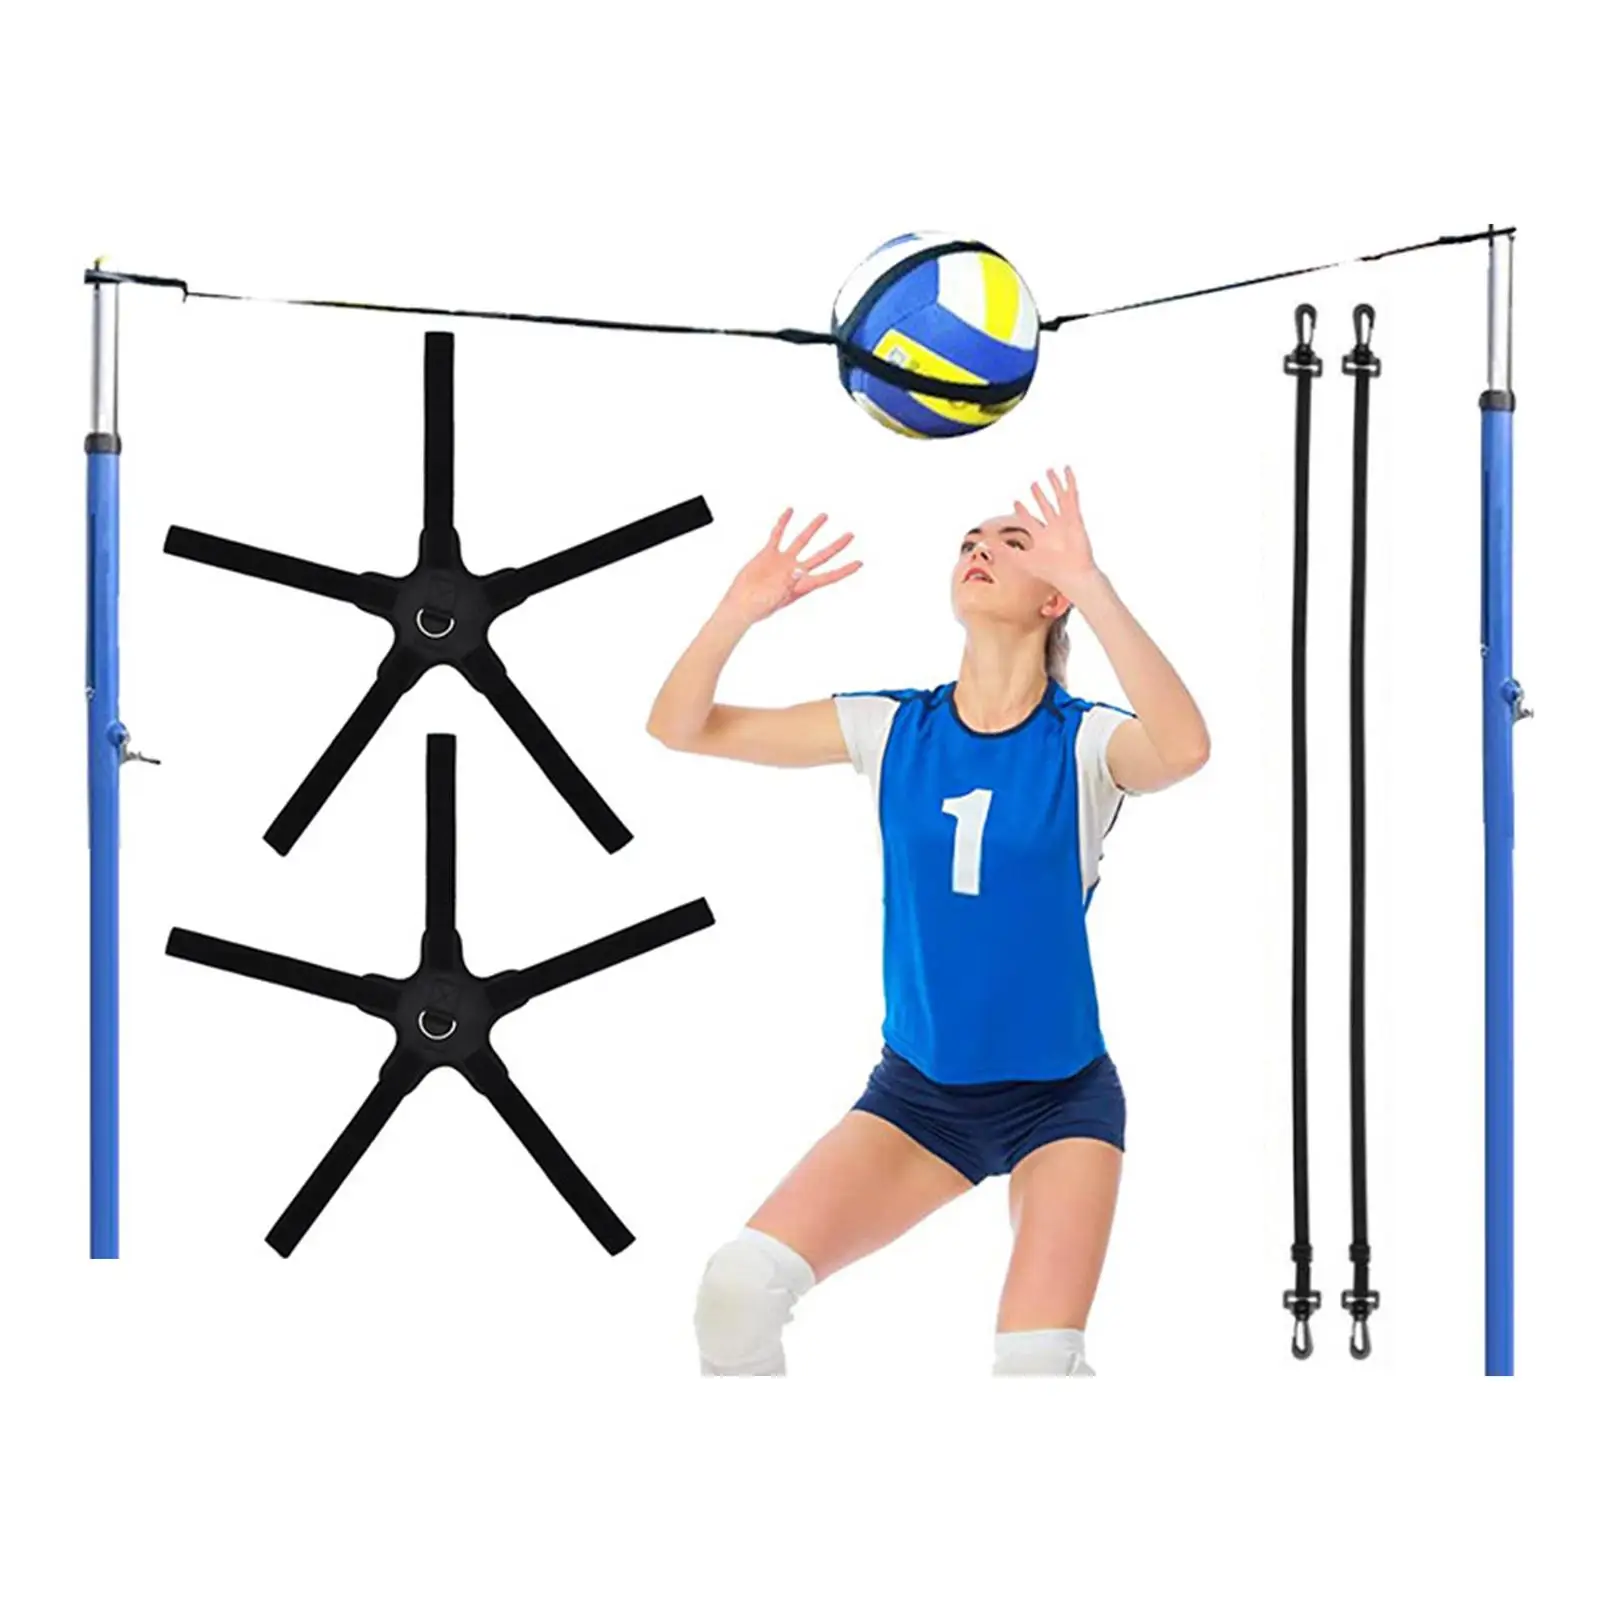 Volleyball Training Equipment, Solo Practice Trainer, Adjustable Gifts for